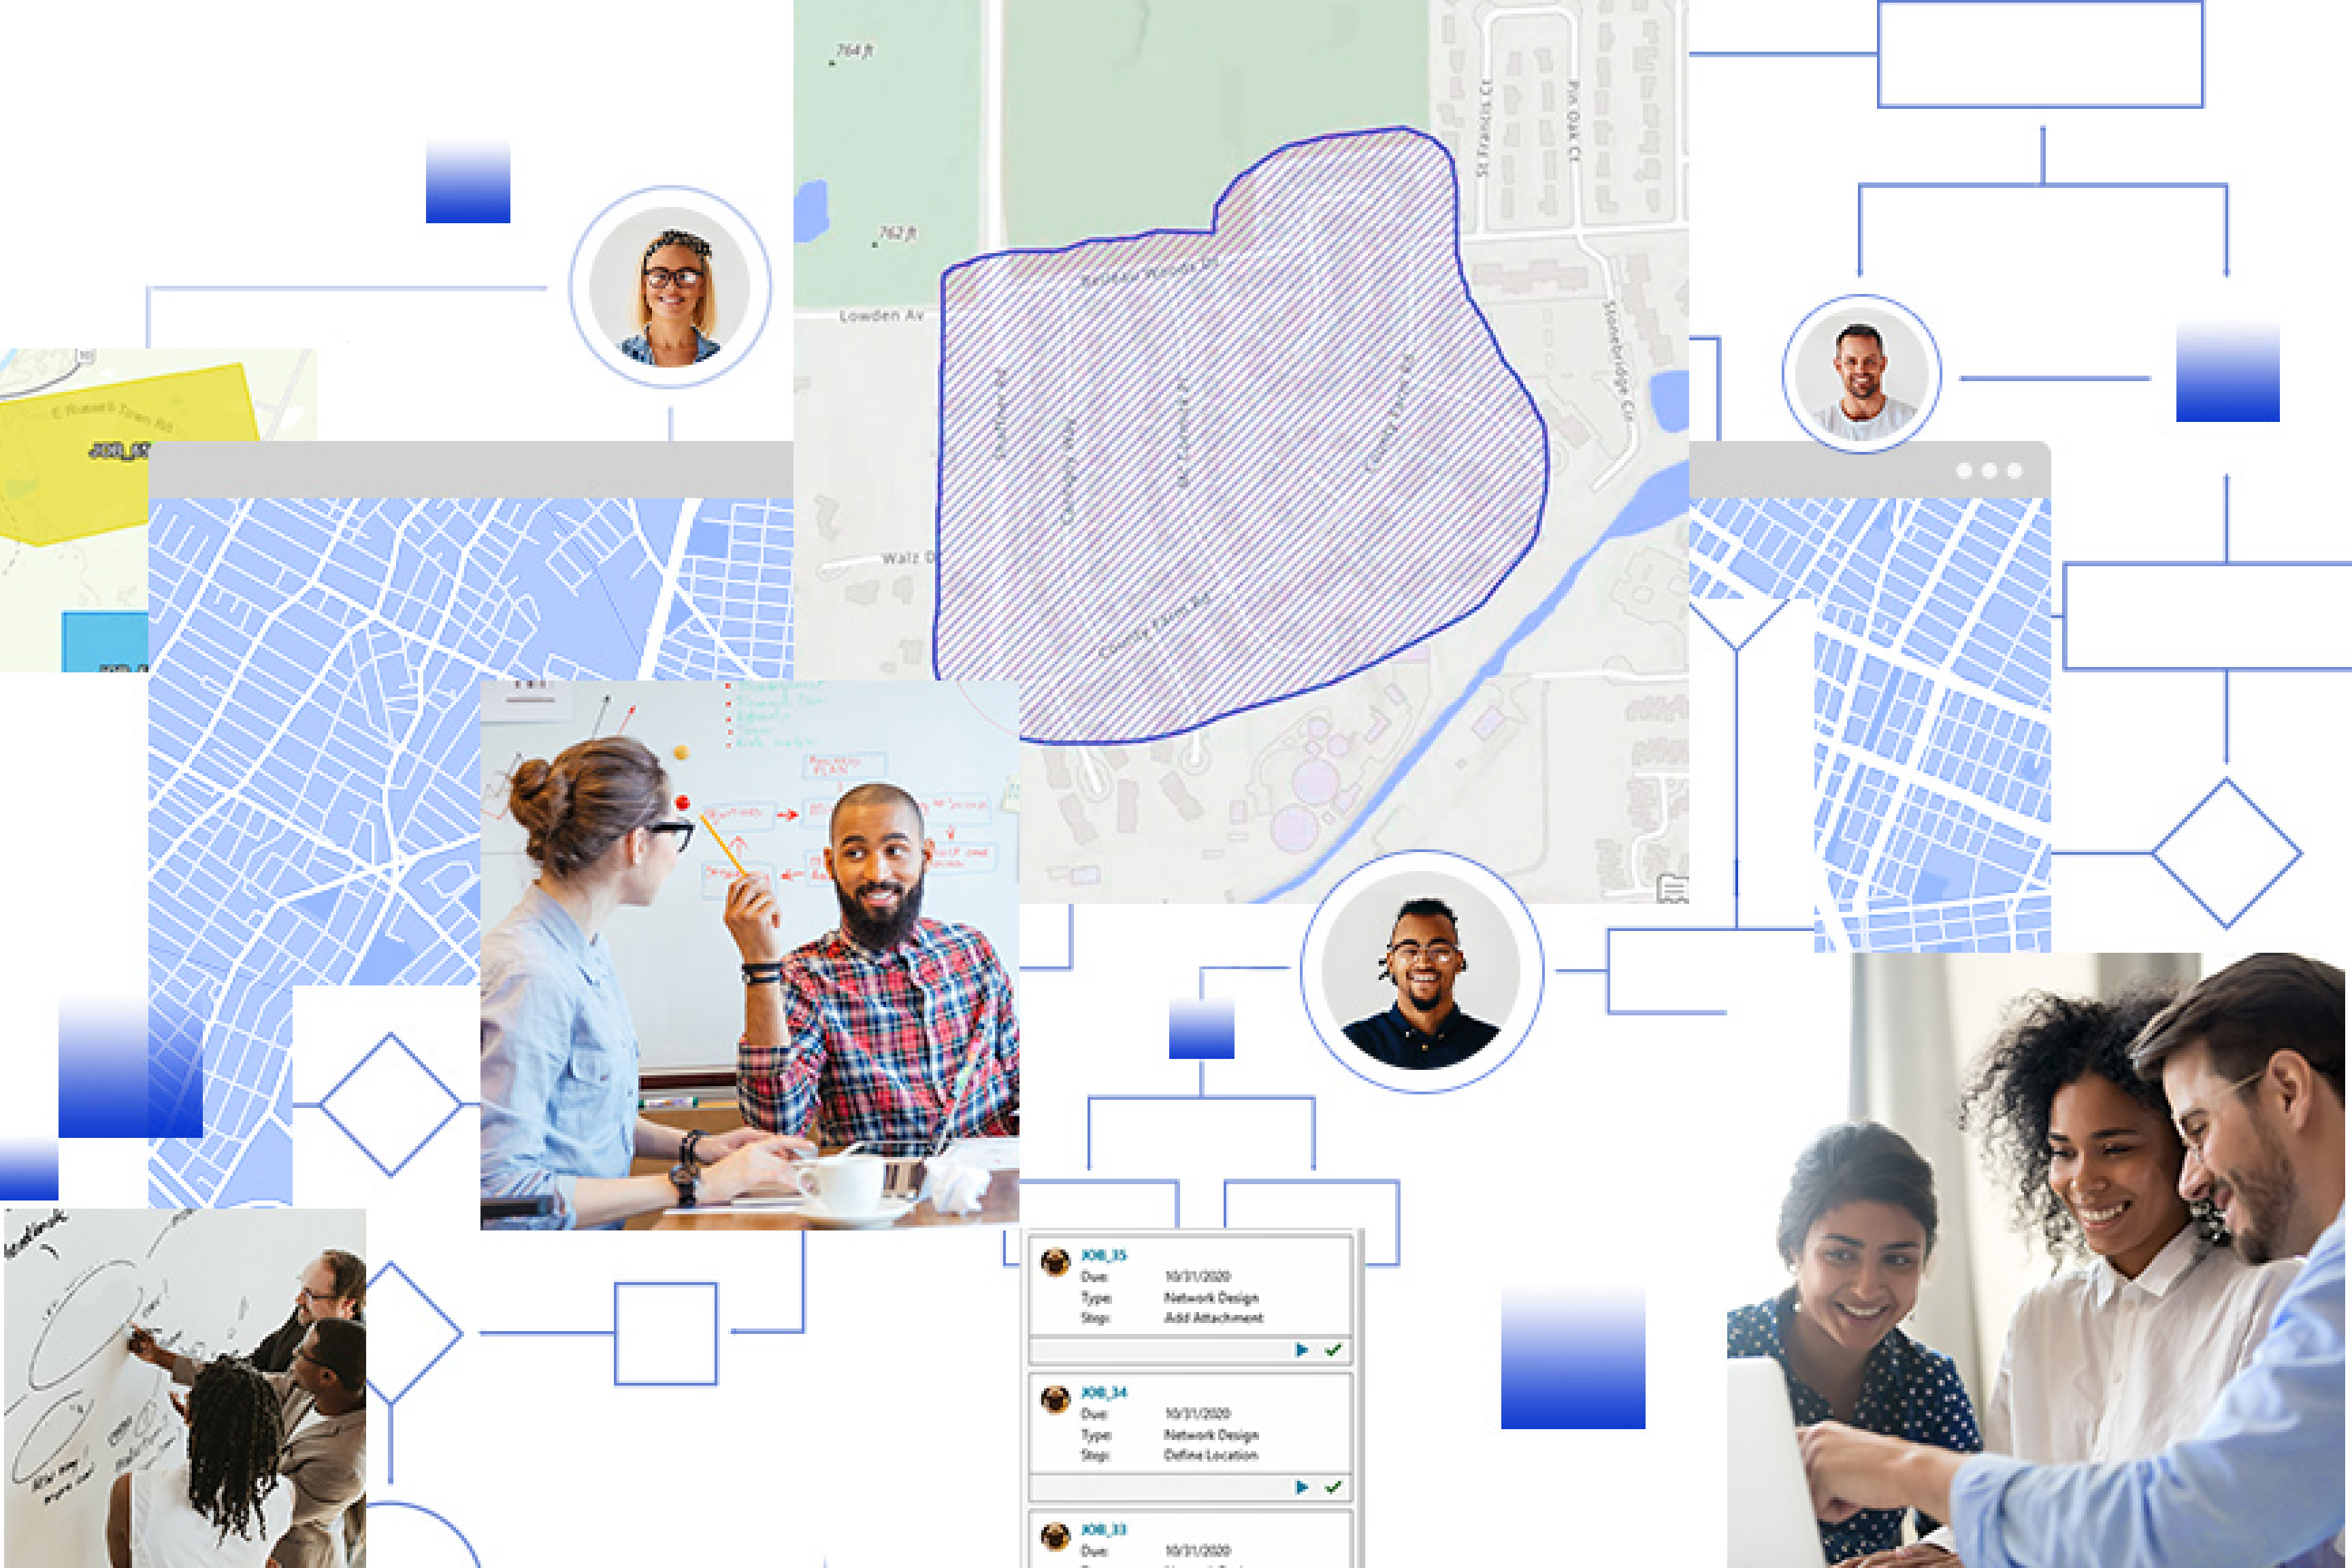 Collection of digital street maps and images of people working together in an office in front of a whiteboard